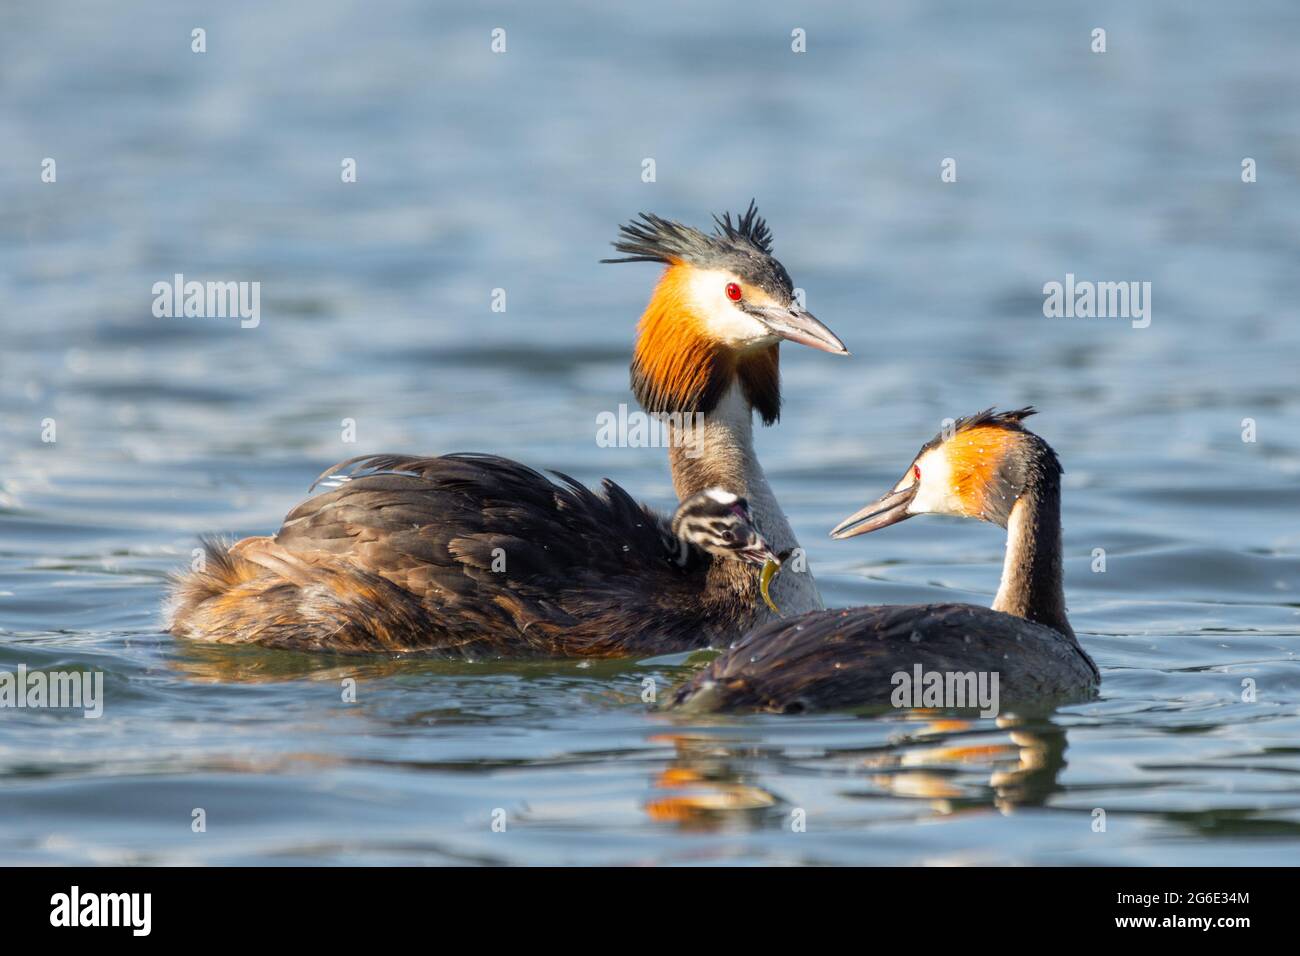 Great Crested Grebe (Podiceps Cristatus) pair. One adult feeds a fish to the chick on the other adult's back. England, UK Stock Photo